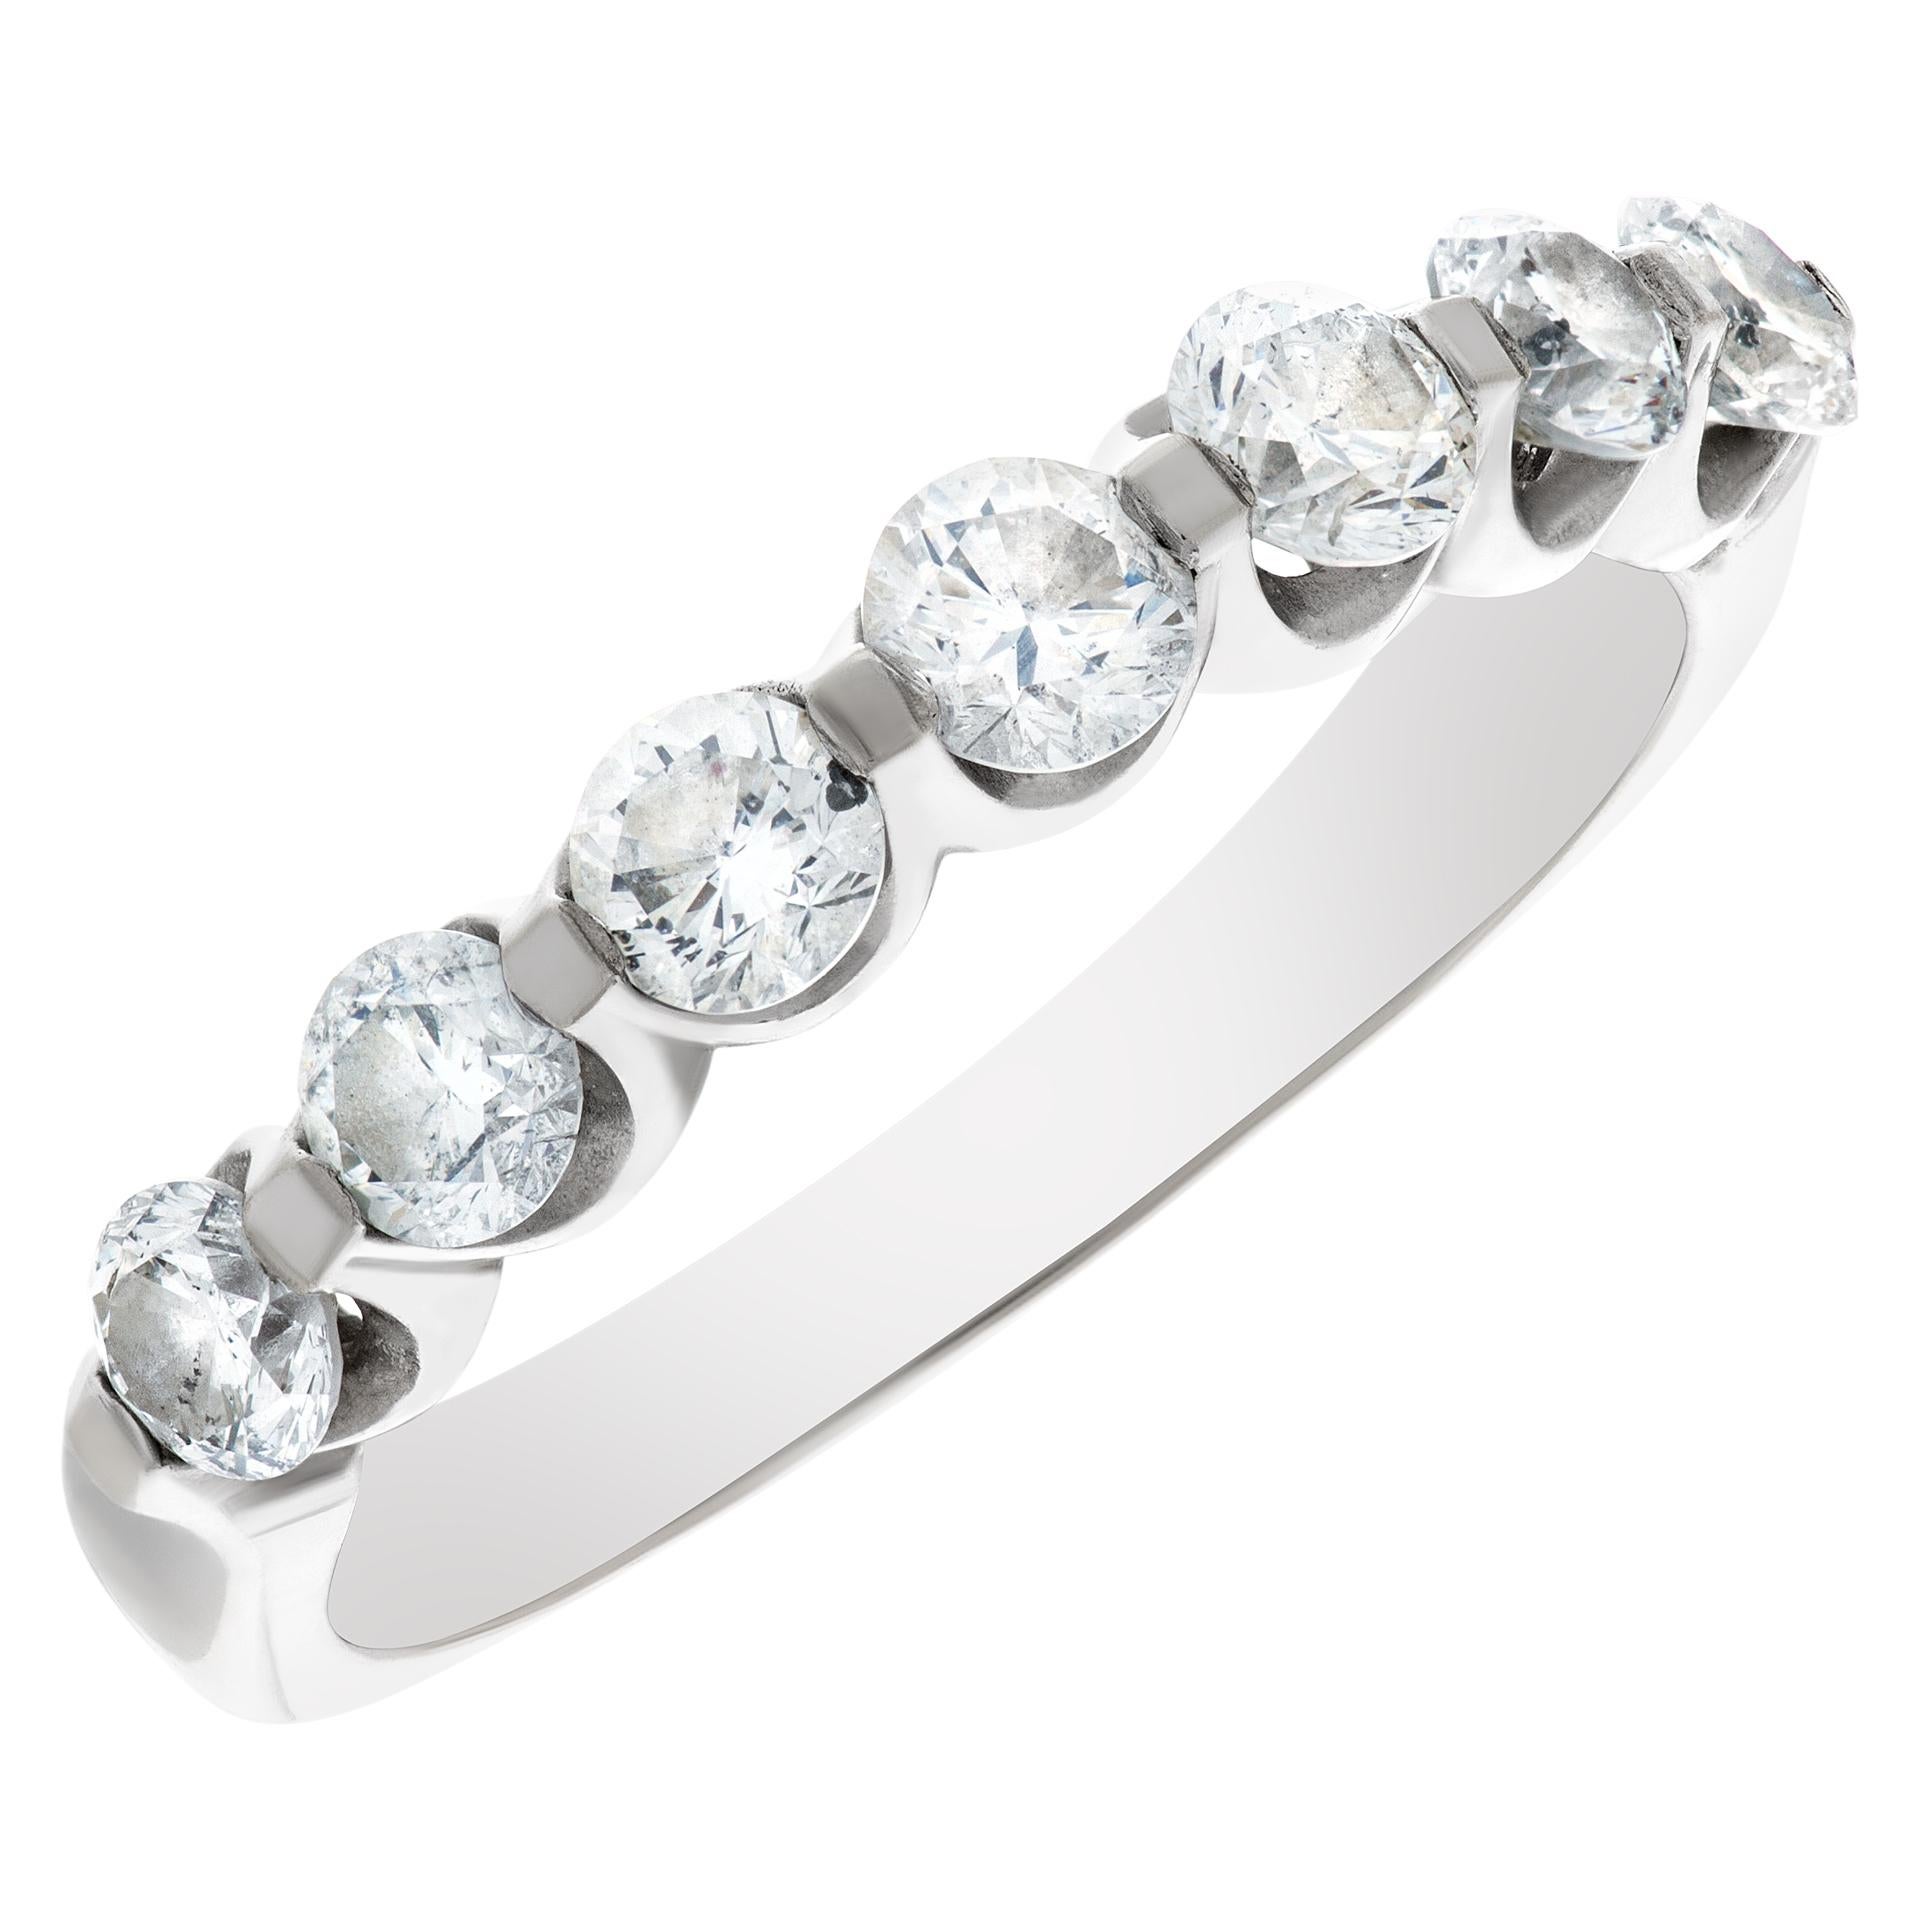 Women's 14k White Gold Diamond Ring with 1.4 Carats in Round Diamonds